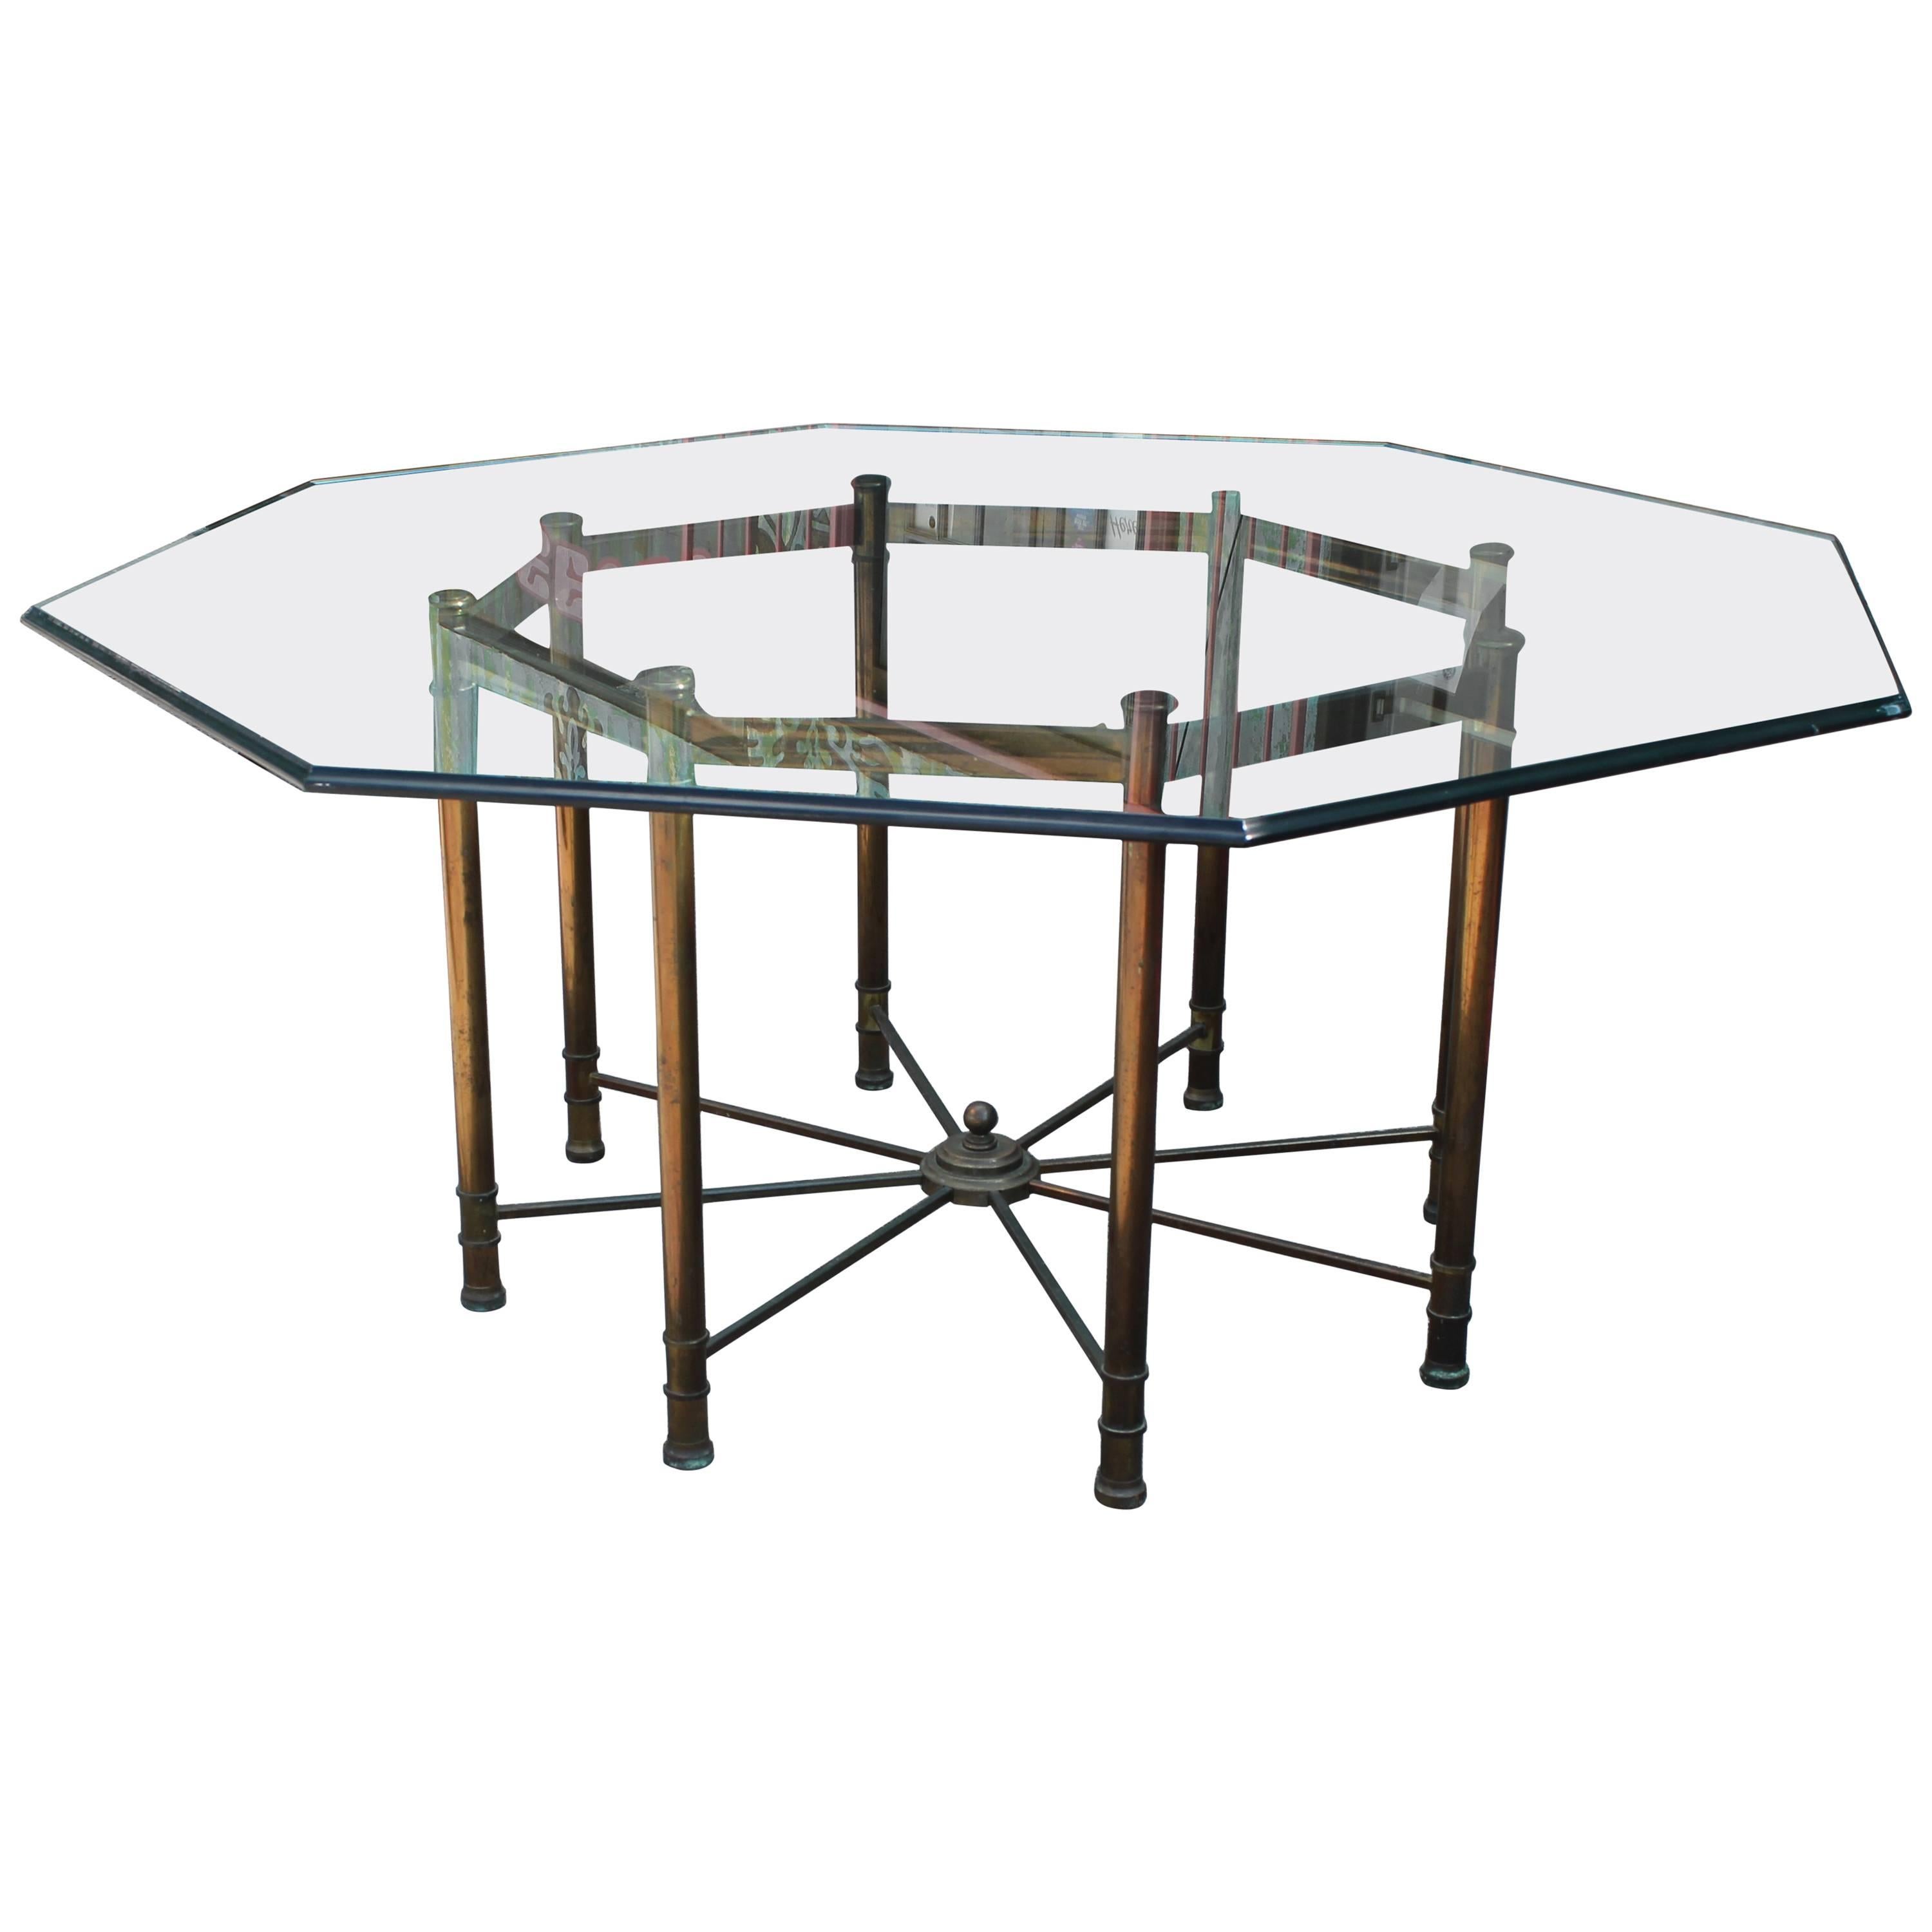 Hollywood Regency Mastercraft Brass and Glass Octagonal Dining Room Table